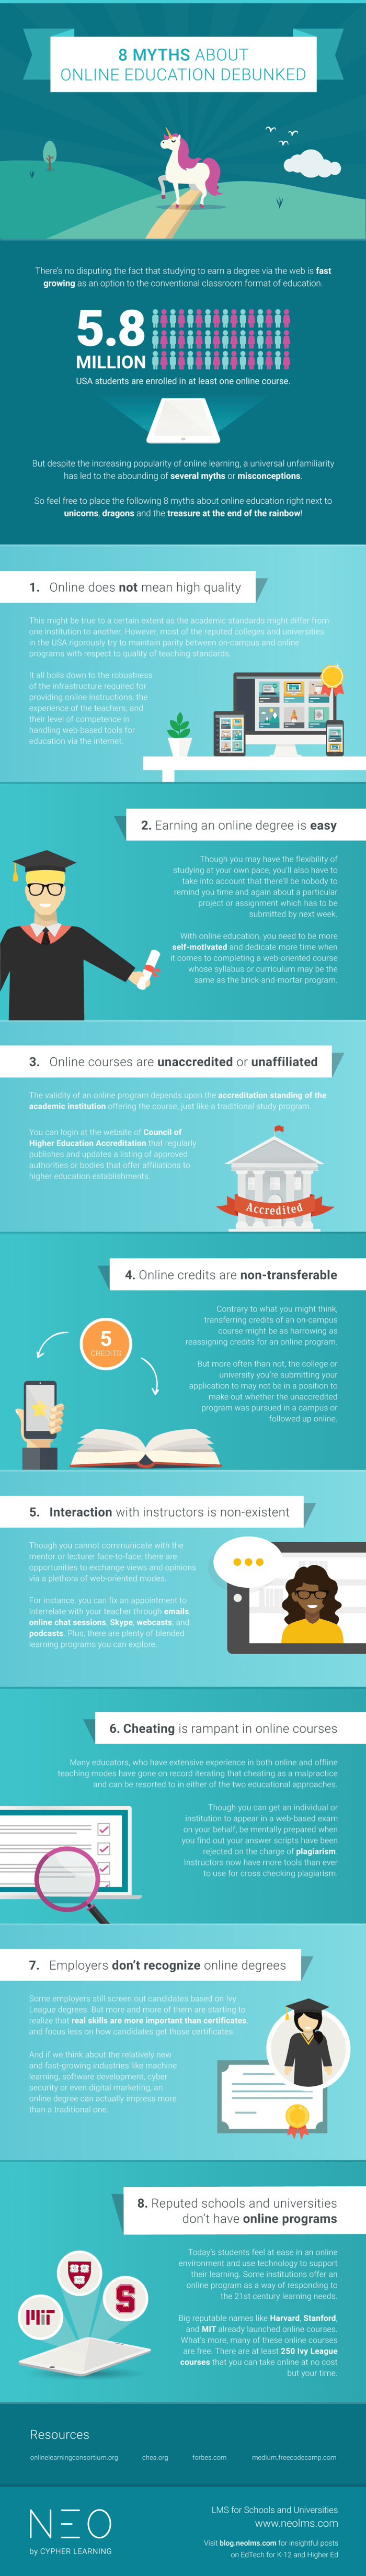 Myths about online education debunked INFOGRAPHIC